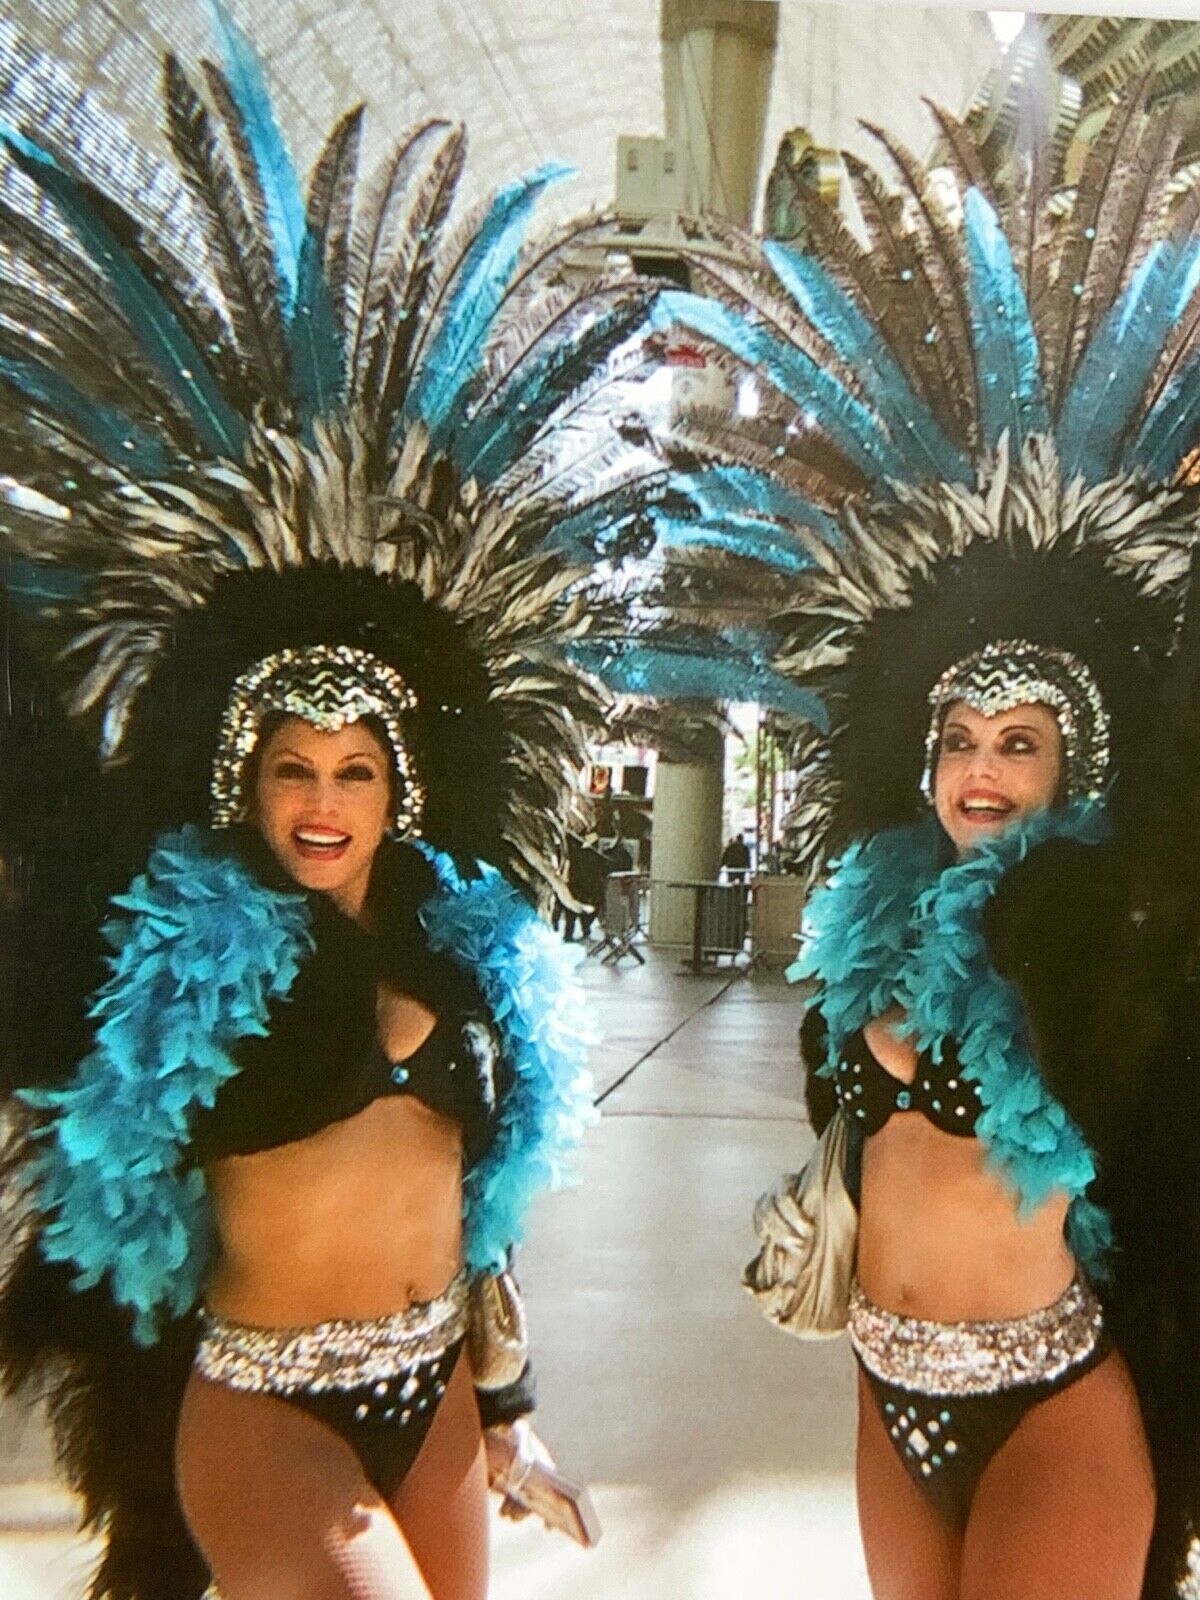 (Kd) FOUND PHOTO Photograph 4x6 Color Las Vegas Feathered Women Feathers